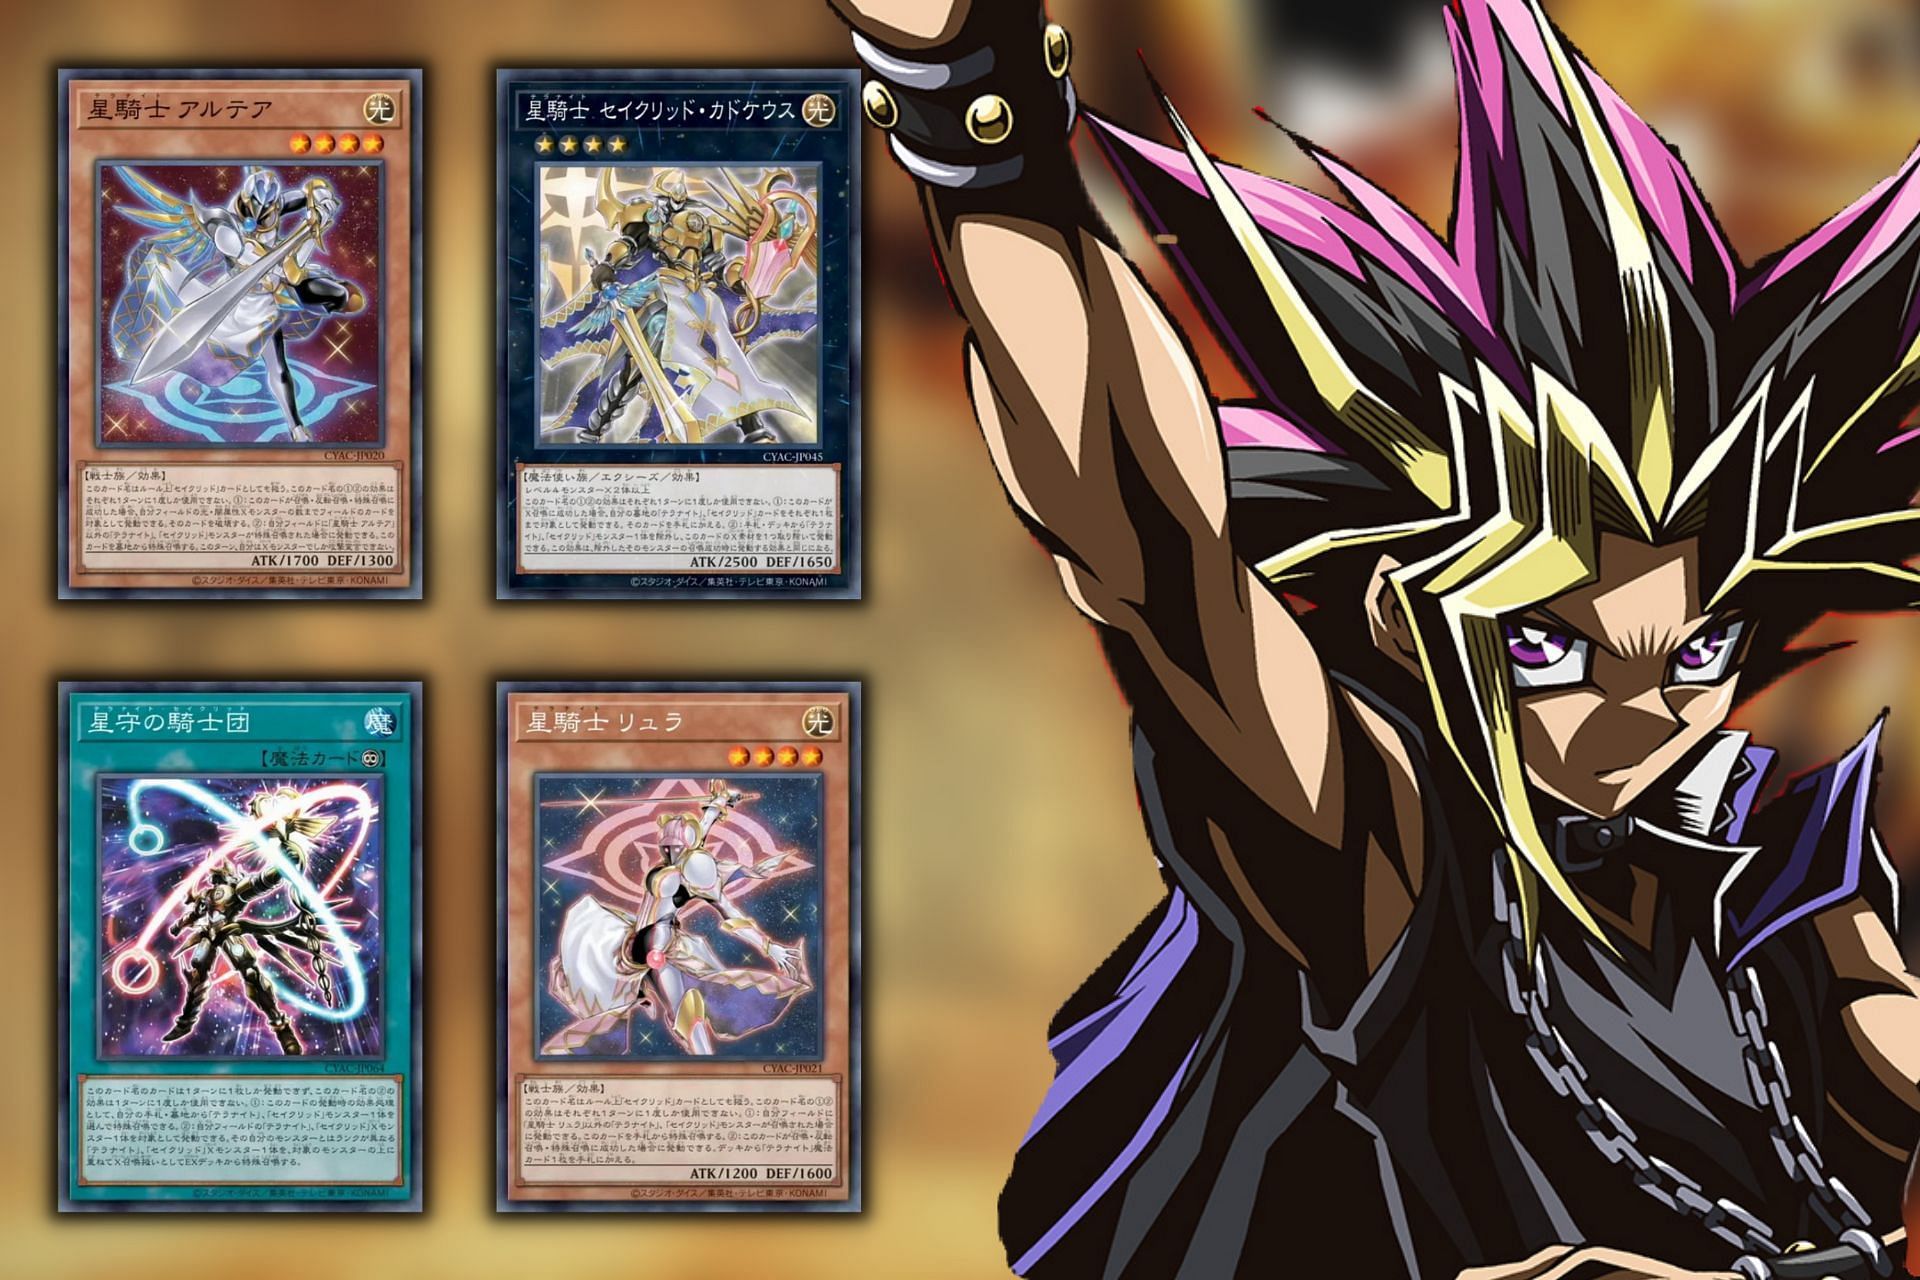 YuGiOh!'s Cyberstorm Access expansion to feature new Tellarknight